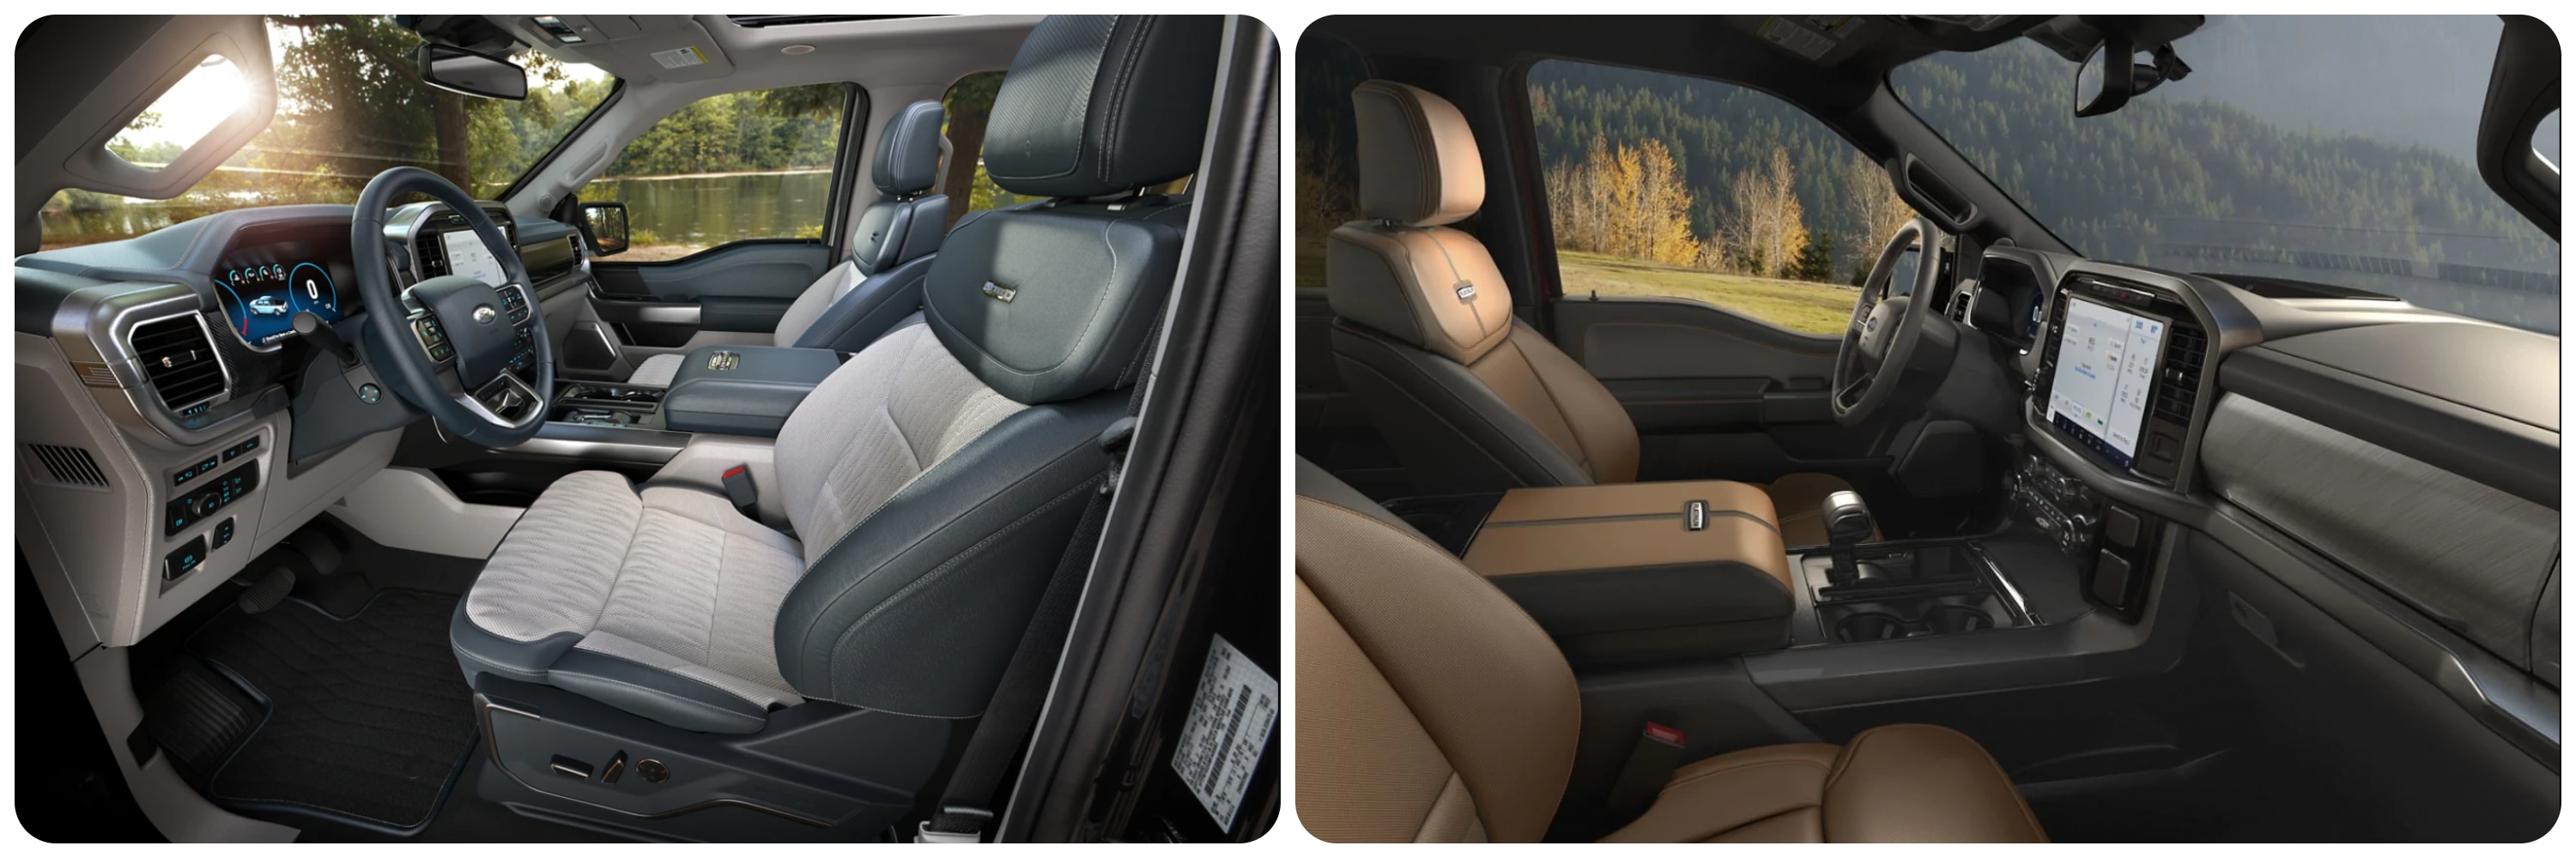 On the left is an interior shot of the cabin of a 2022 Ford F-150 trimmed in dark and light gray showing the digital dash. On the right, an interior shot of the 2021 Ford F-150 trimmed in gray and camel colored leather, showing the large touchscreen interface mounted in the center of the dash